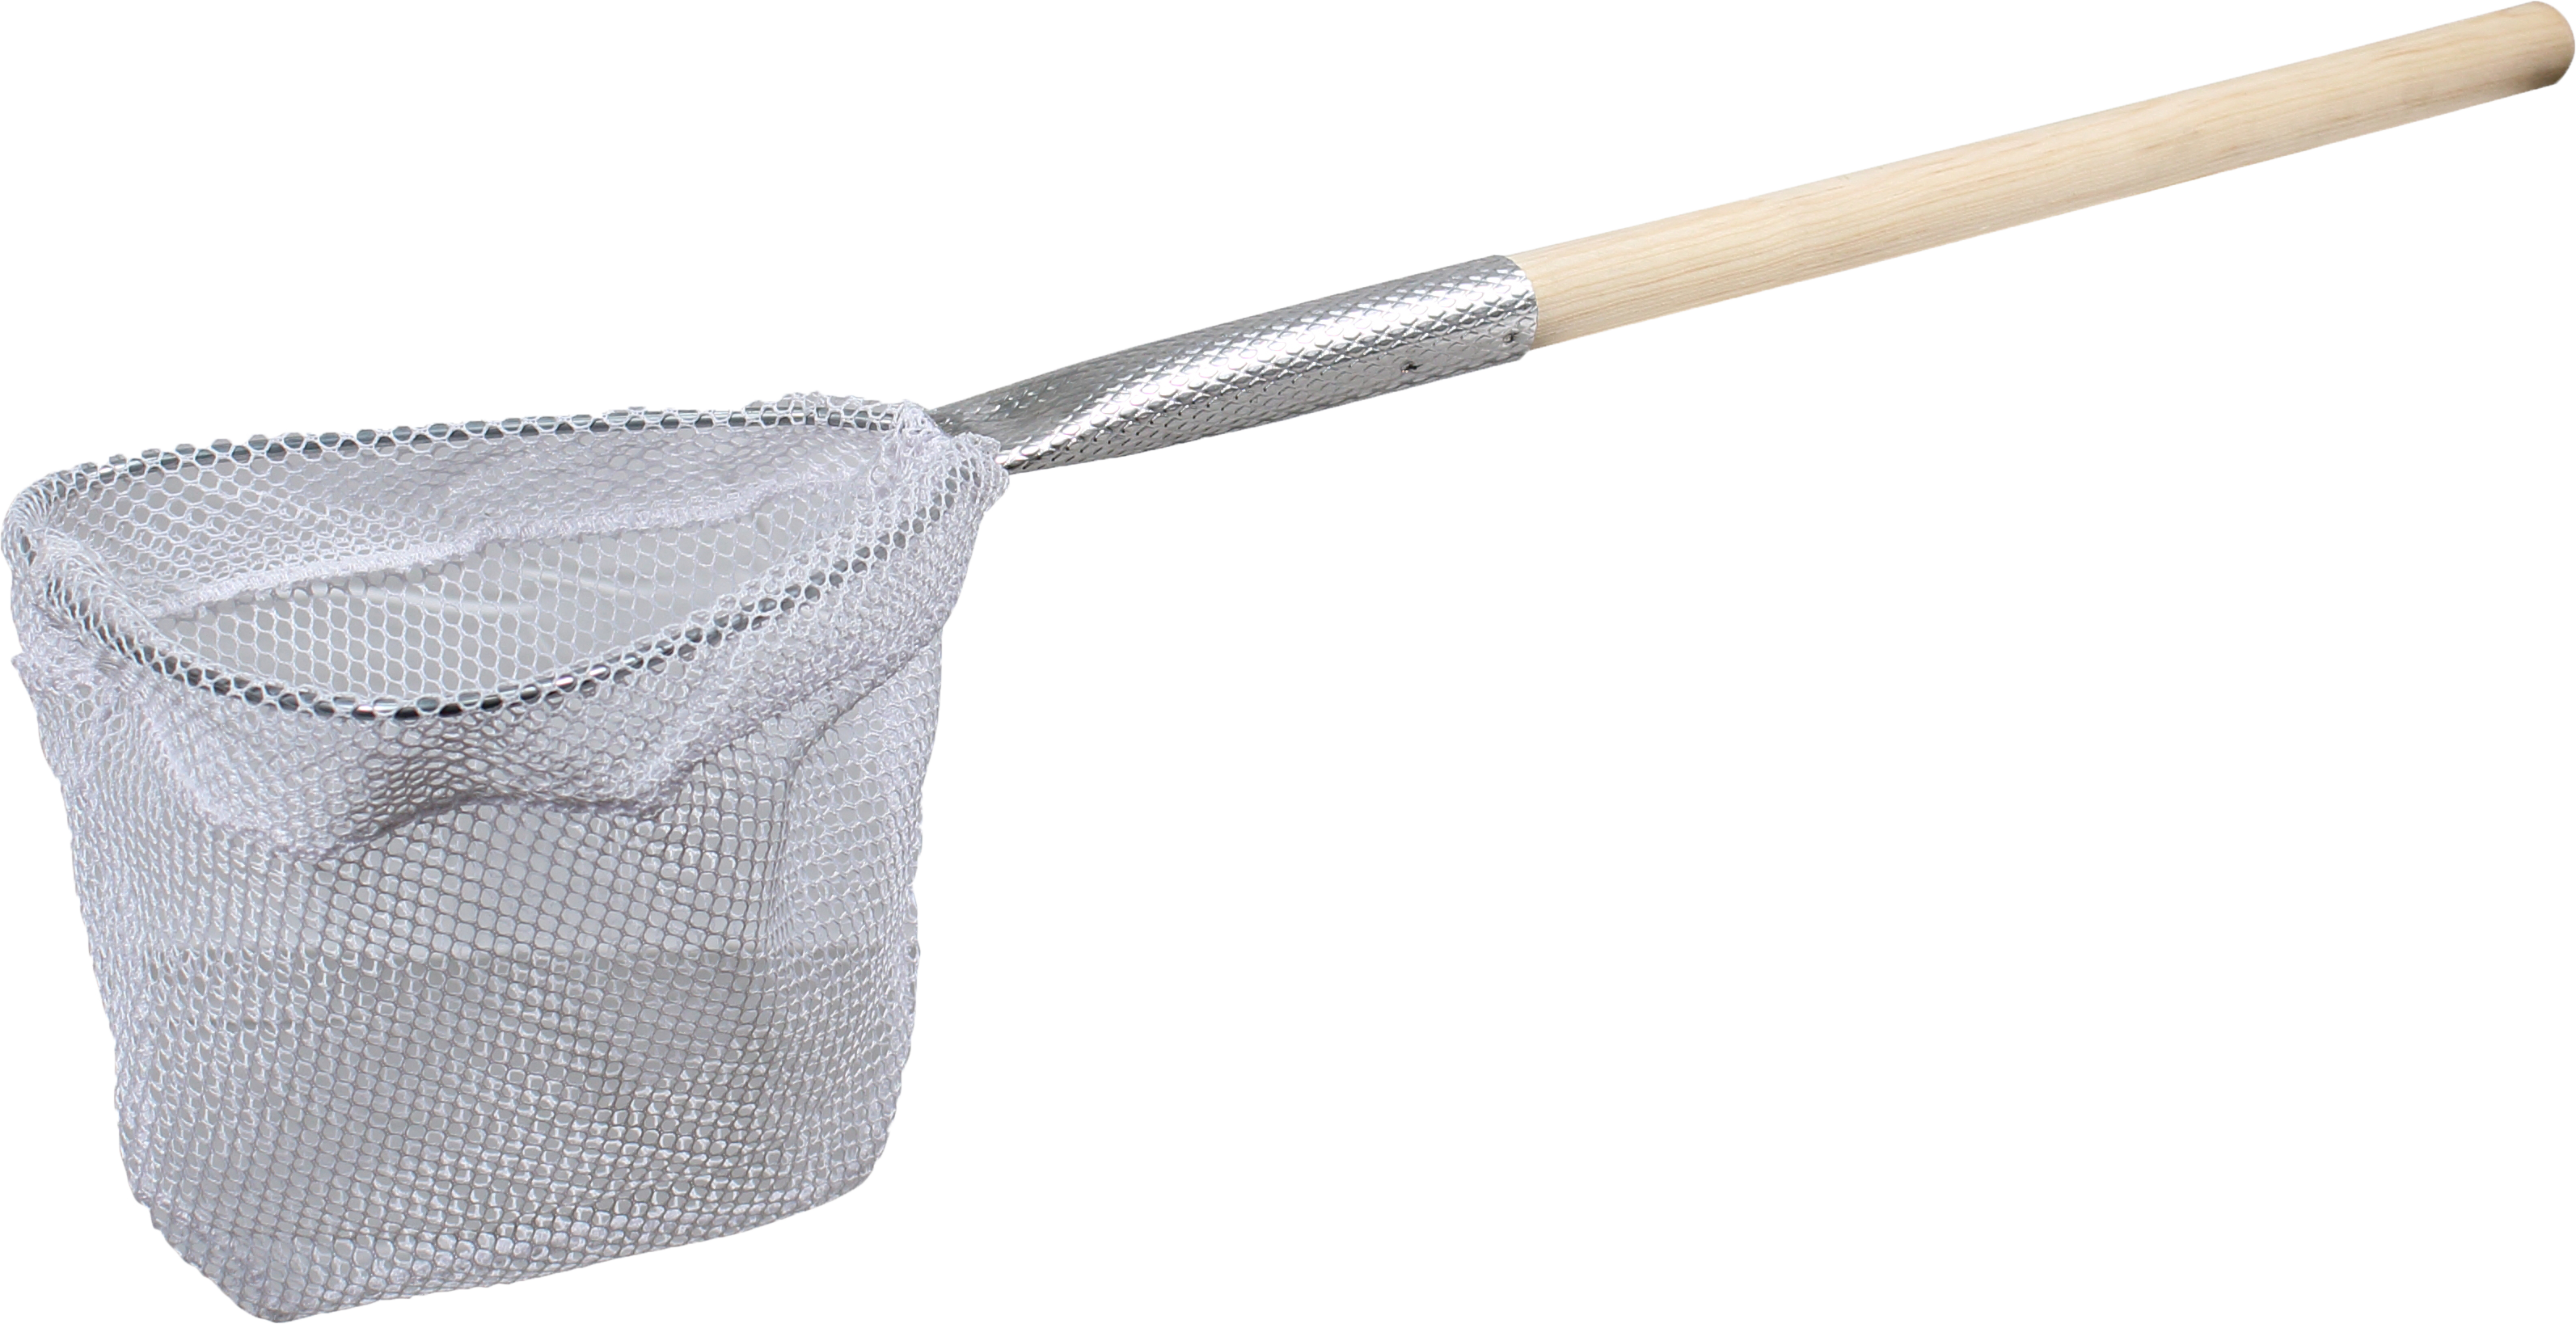 A Net With A Handle